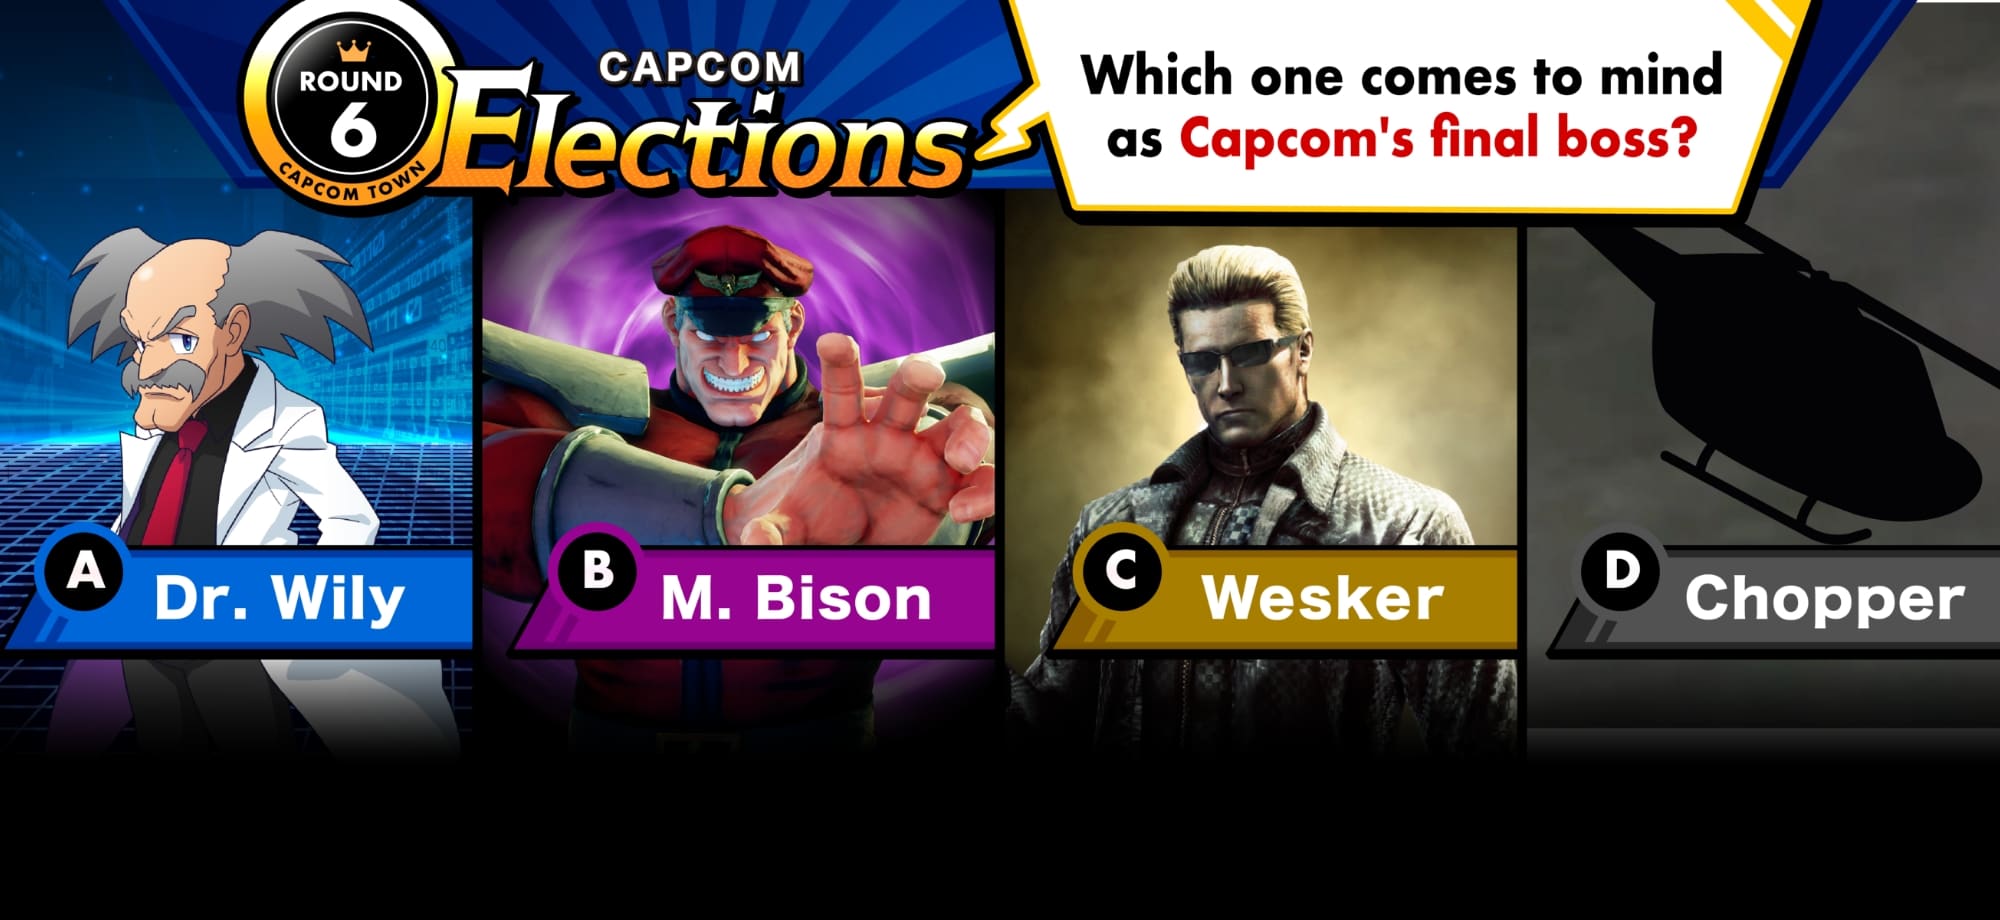 Capcom Elections Round 6 Which one comes to mind as Capcom's final boss?